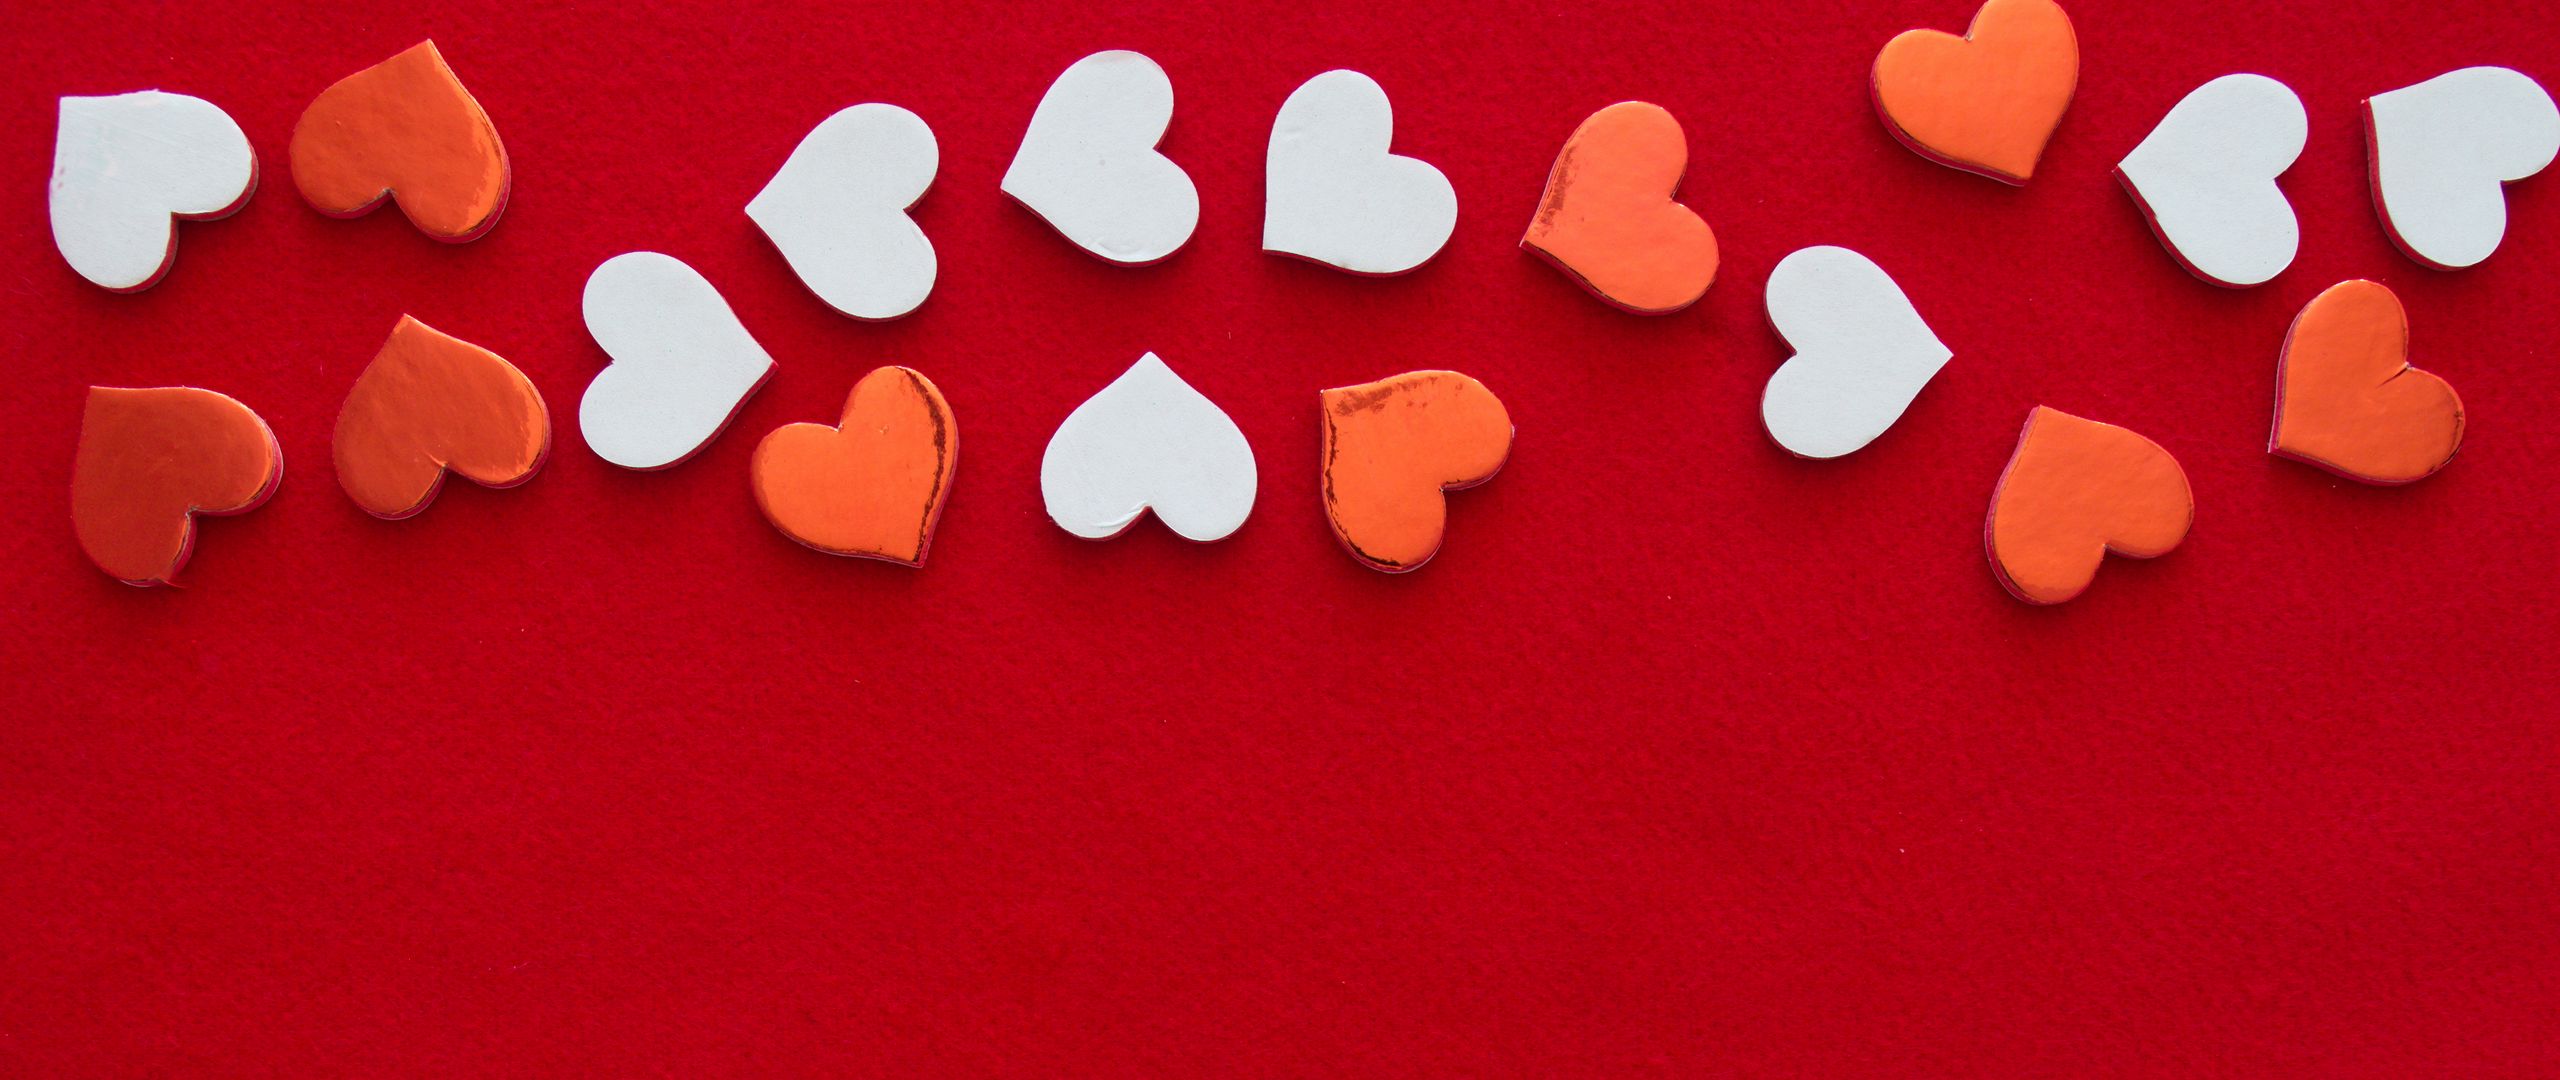 2560x1080 Wallpaper hearts, love, background, white, red